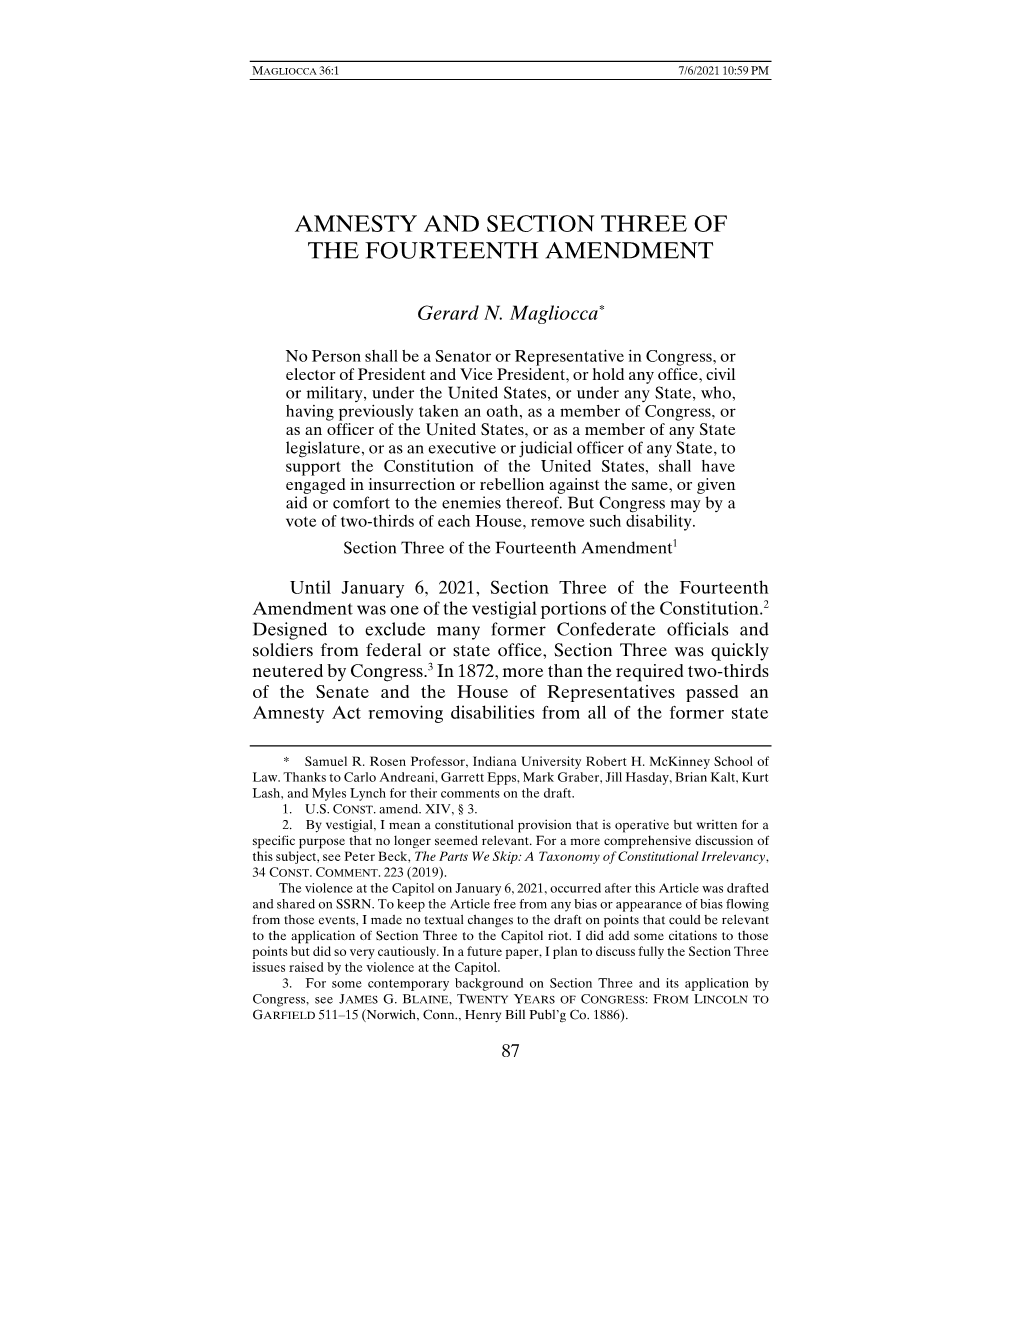 Amnesty and Section Three of the Fourteenth Amendment